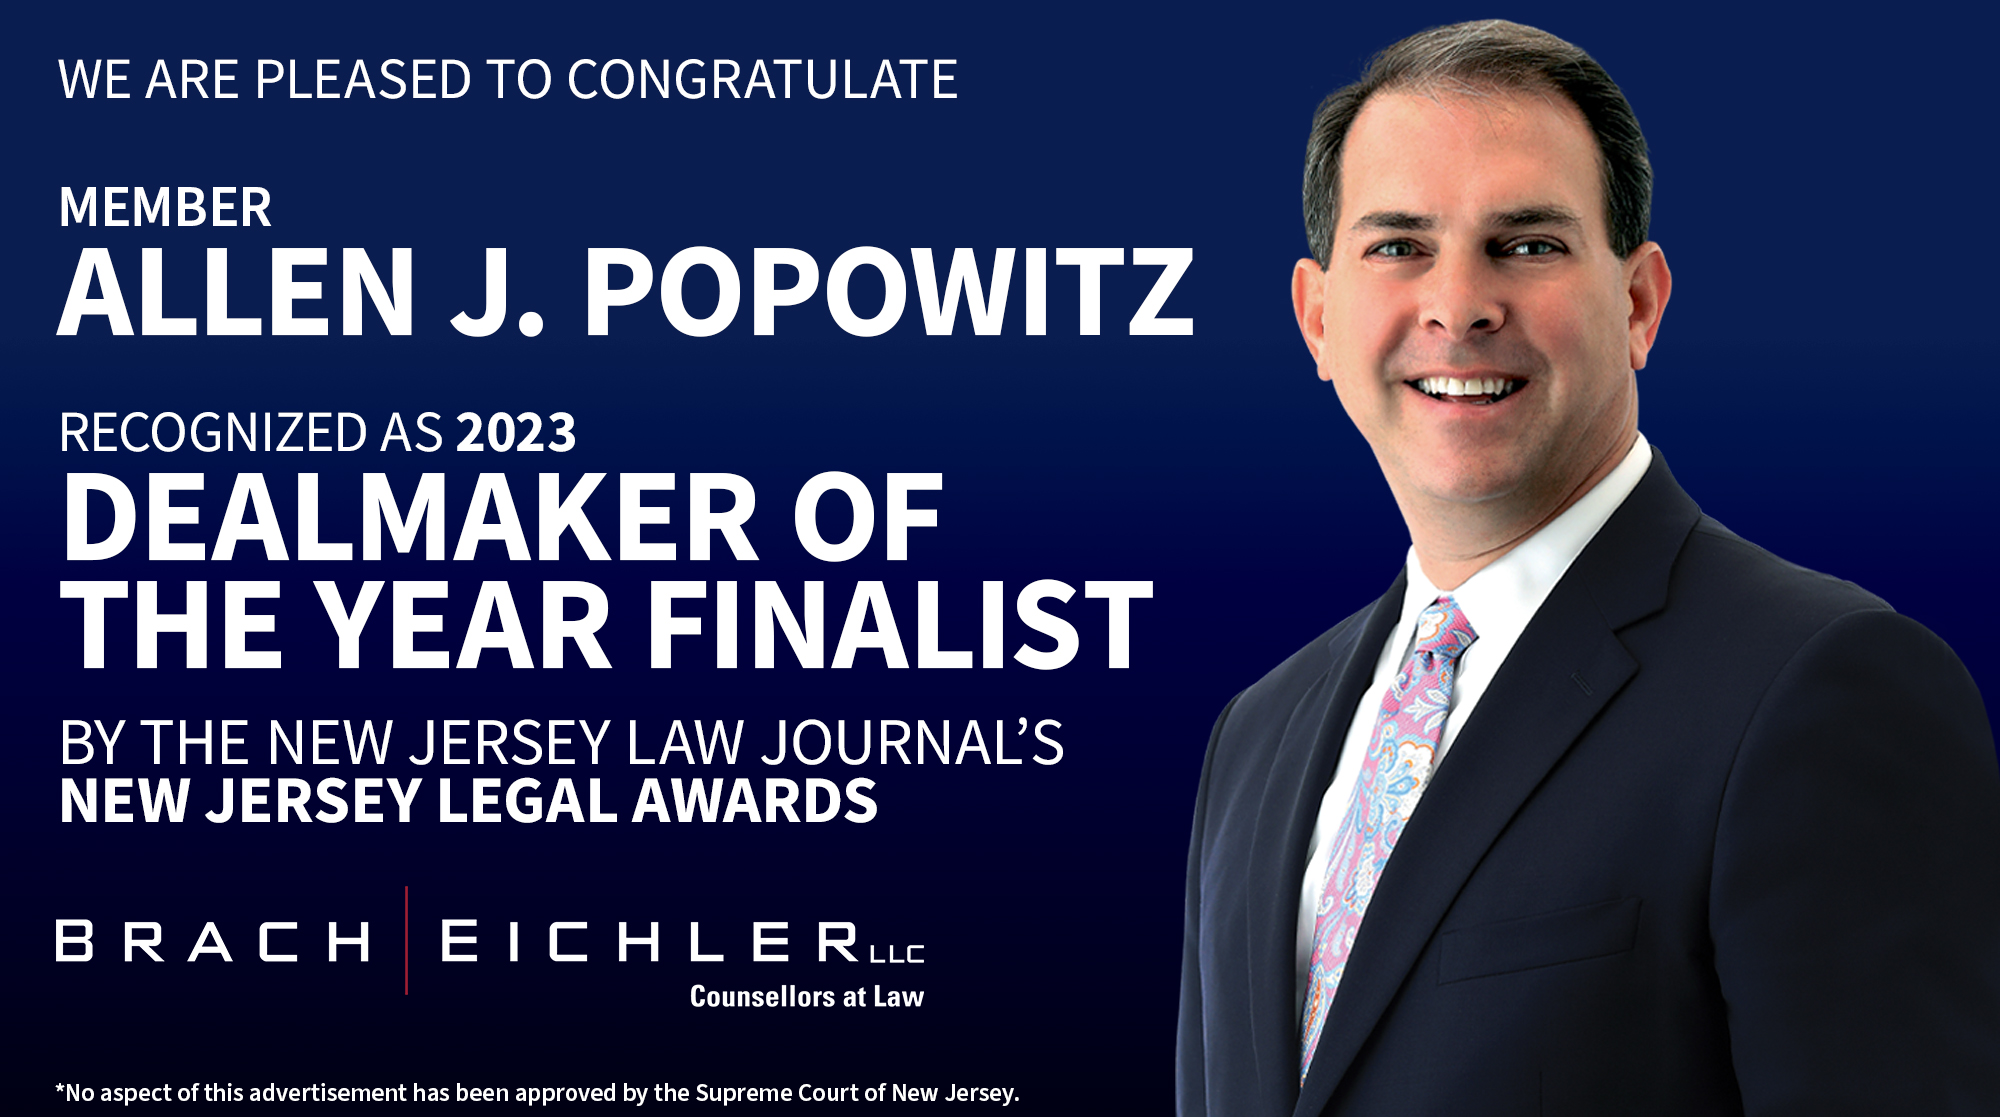 Allen Popowitz recognized as one of the “Dealmakers of the Year” finalists by the New Jersey Law Journal as part of its 2023 New Jersey Legal Awards